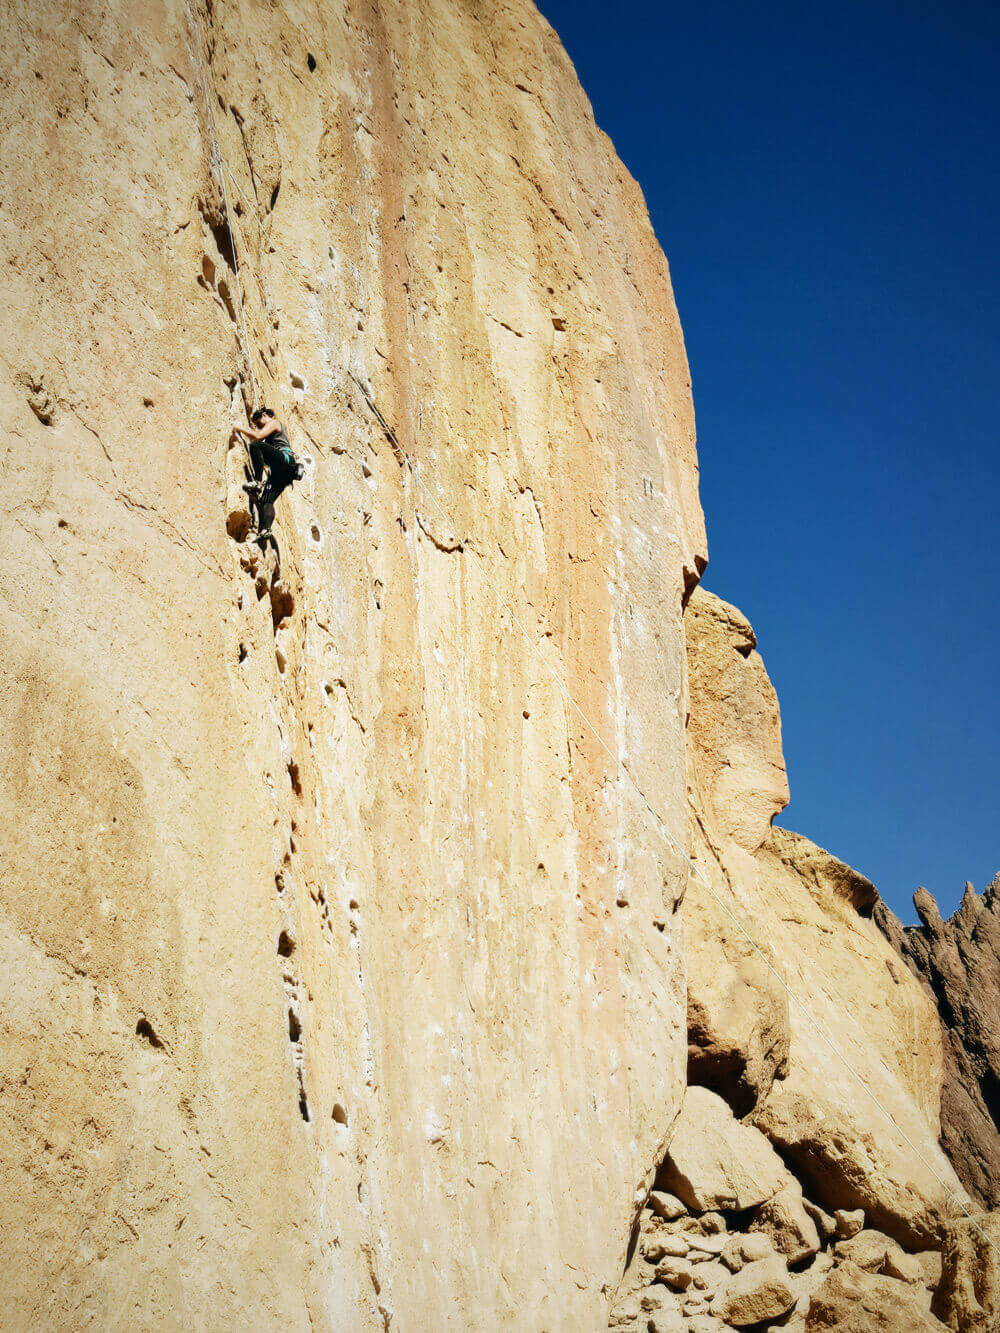 Moving on up... literally! (Climbing in Smith Rock, Oregon)